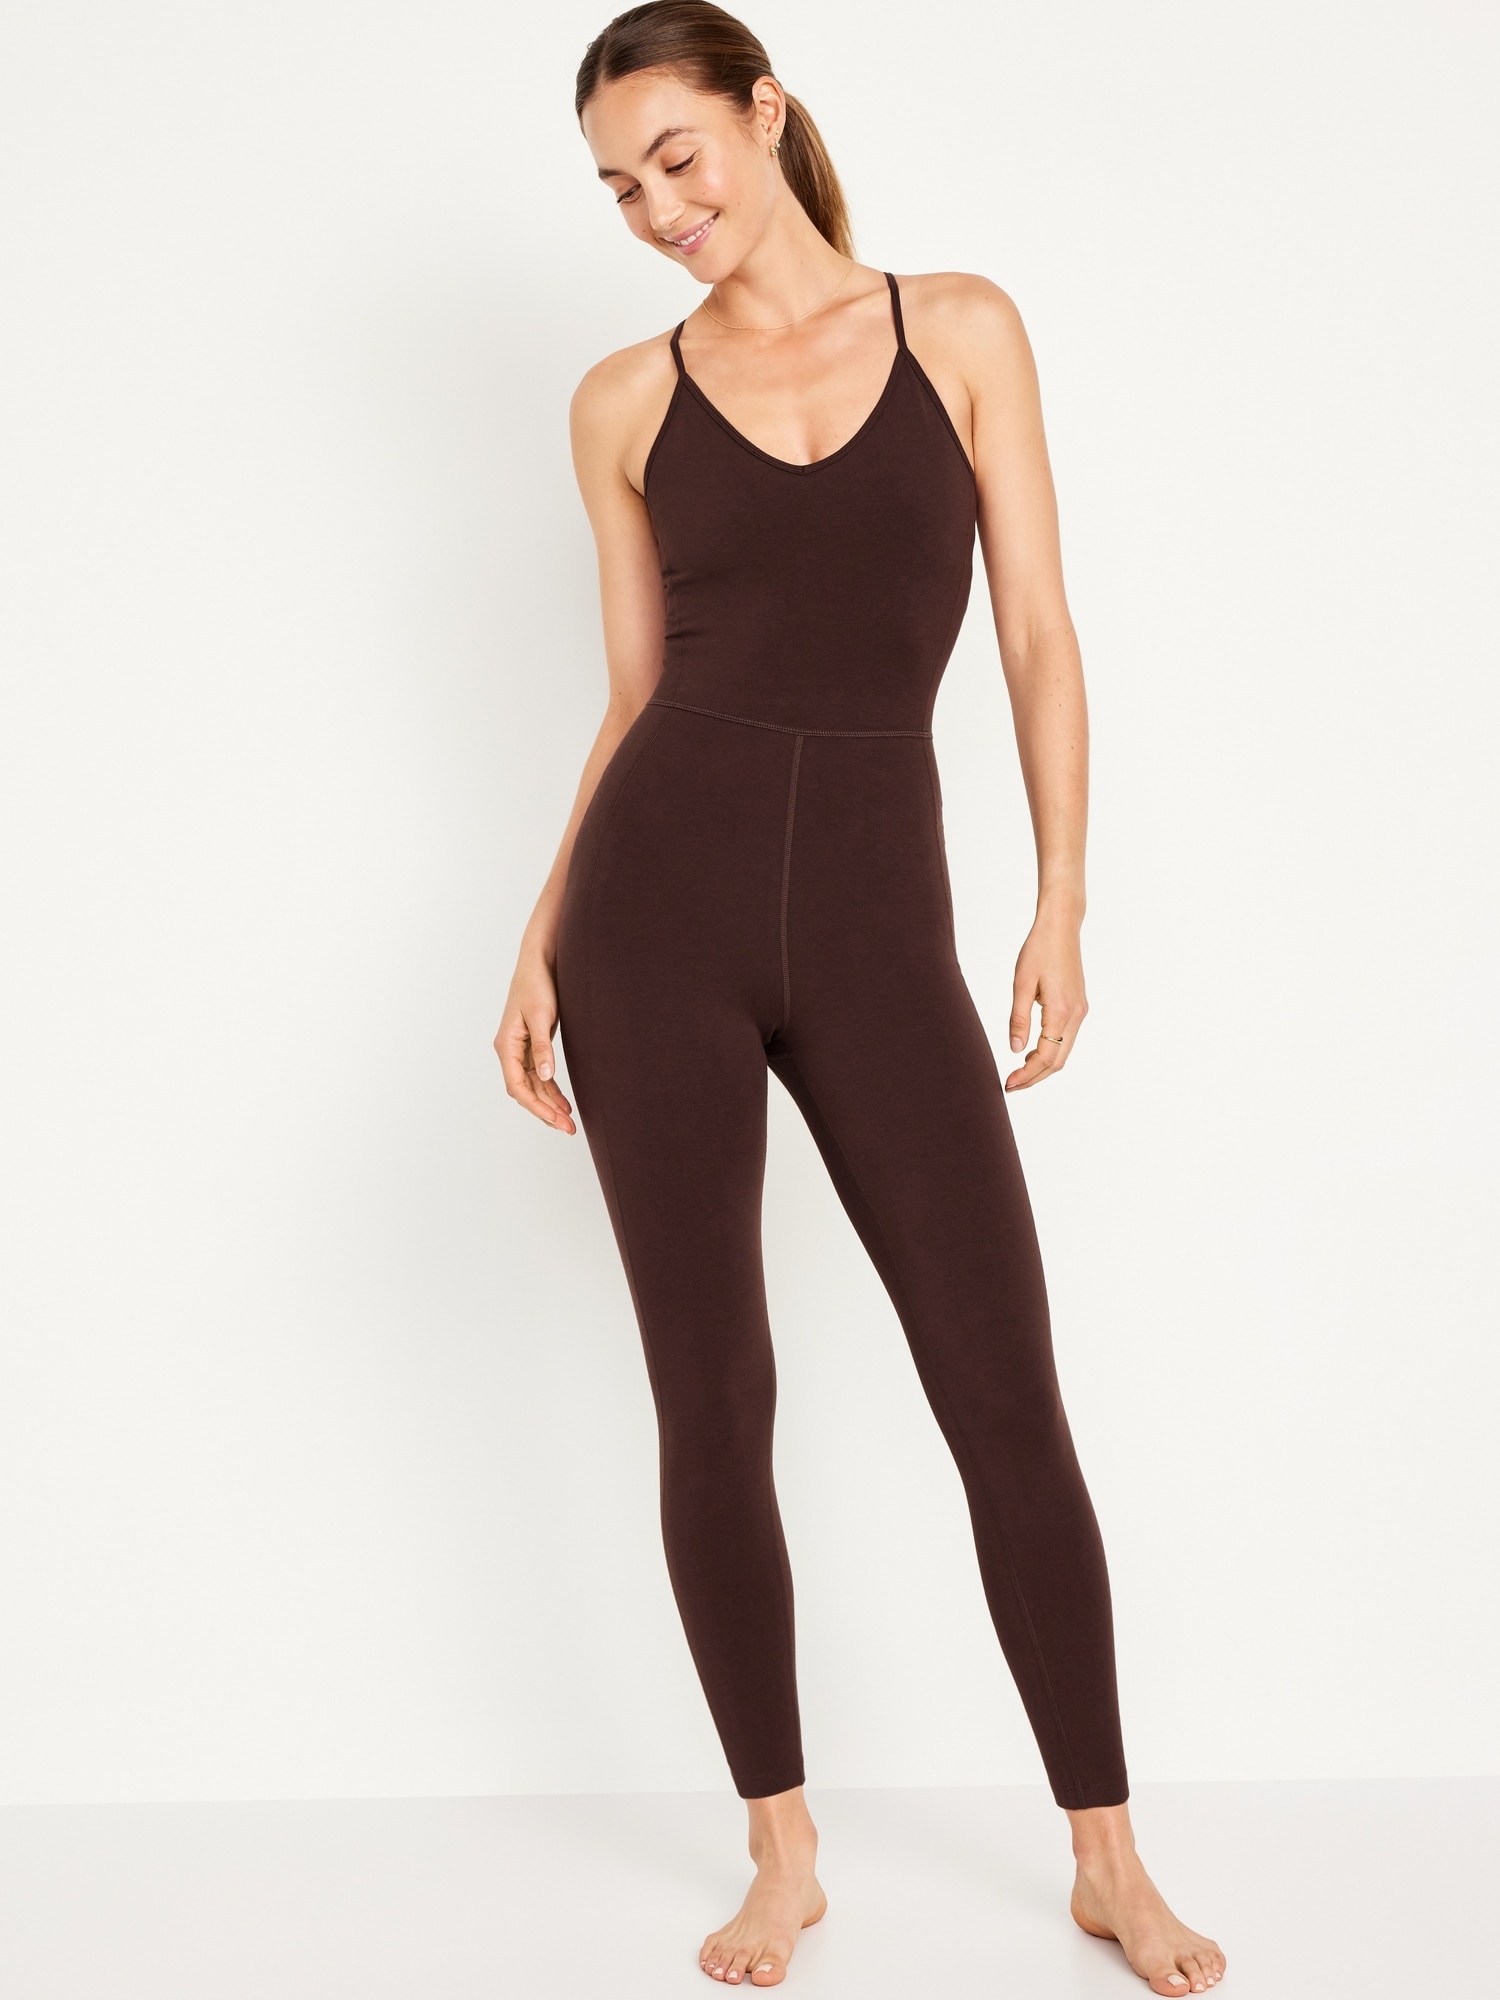 Old Navy, Pants & Jumpsuits, Old Navy Active Leggings